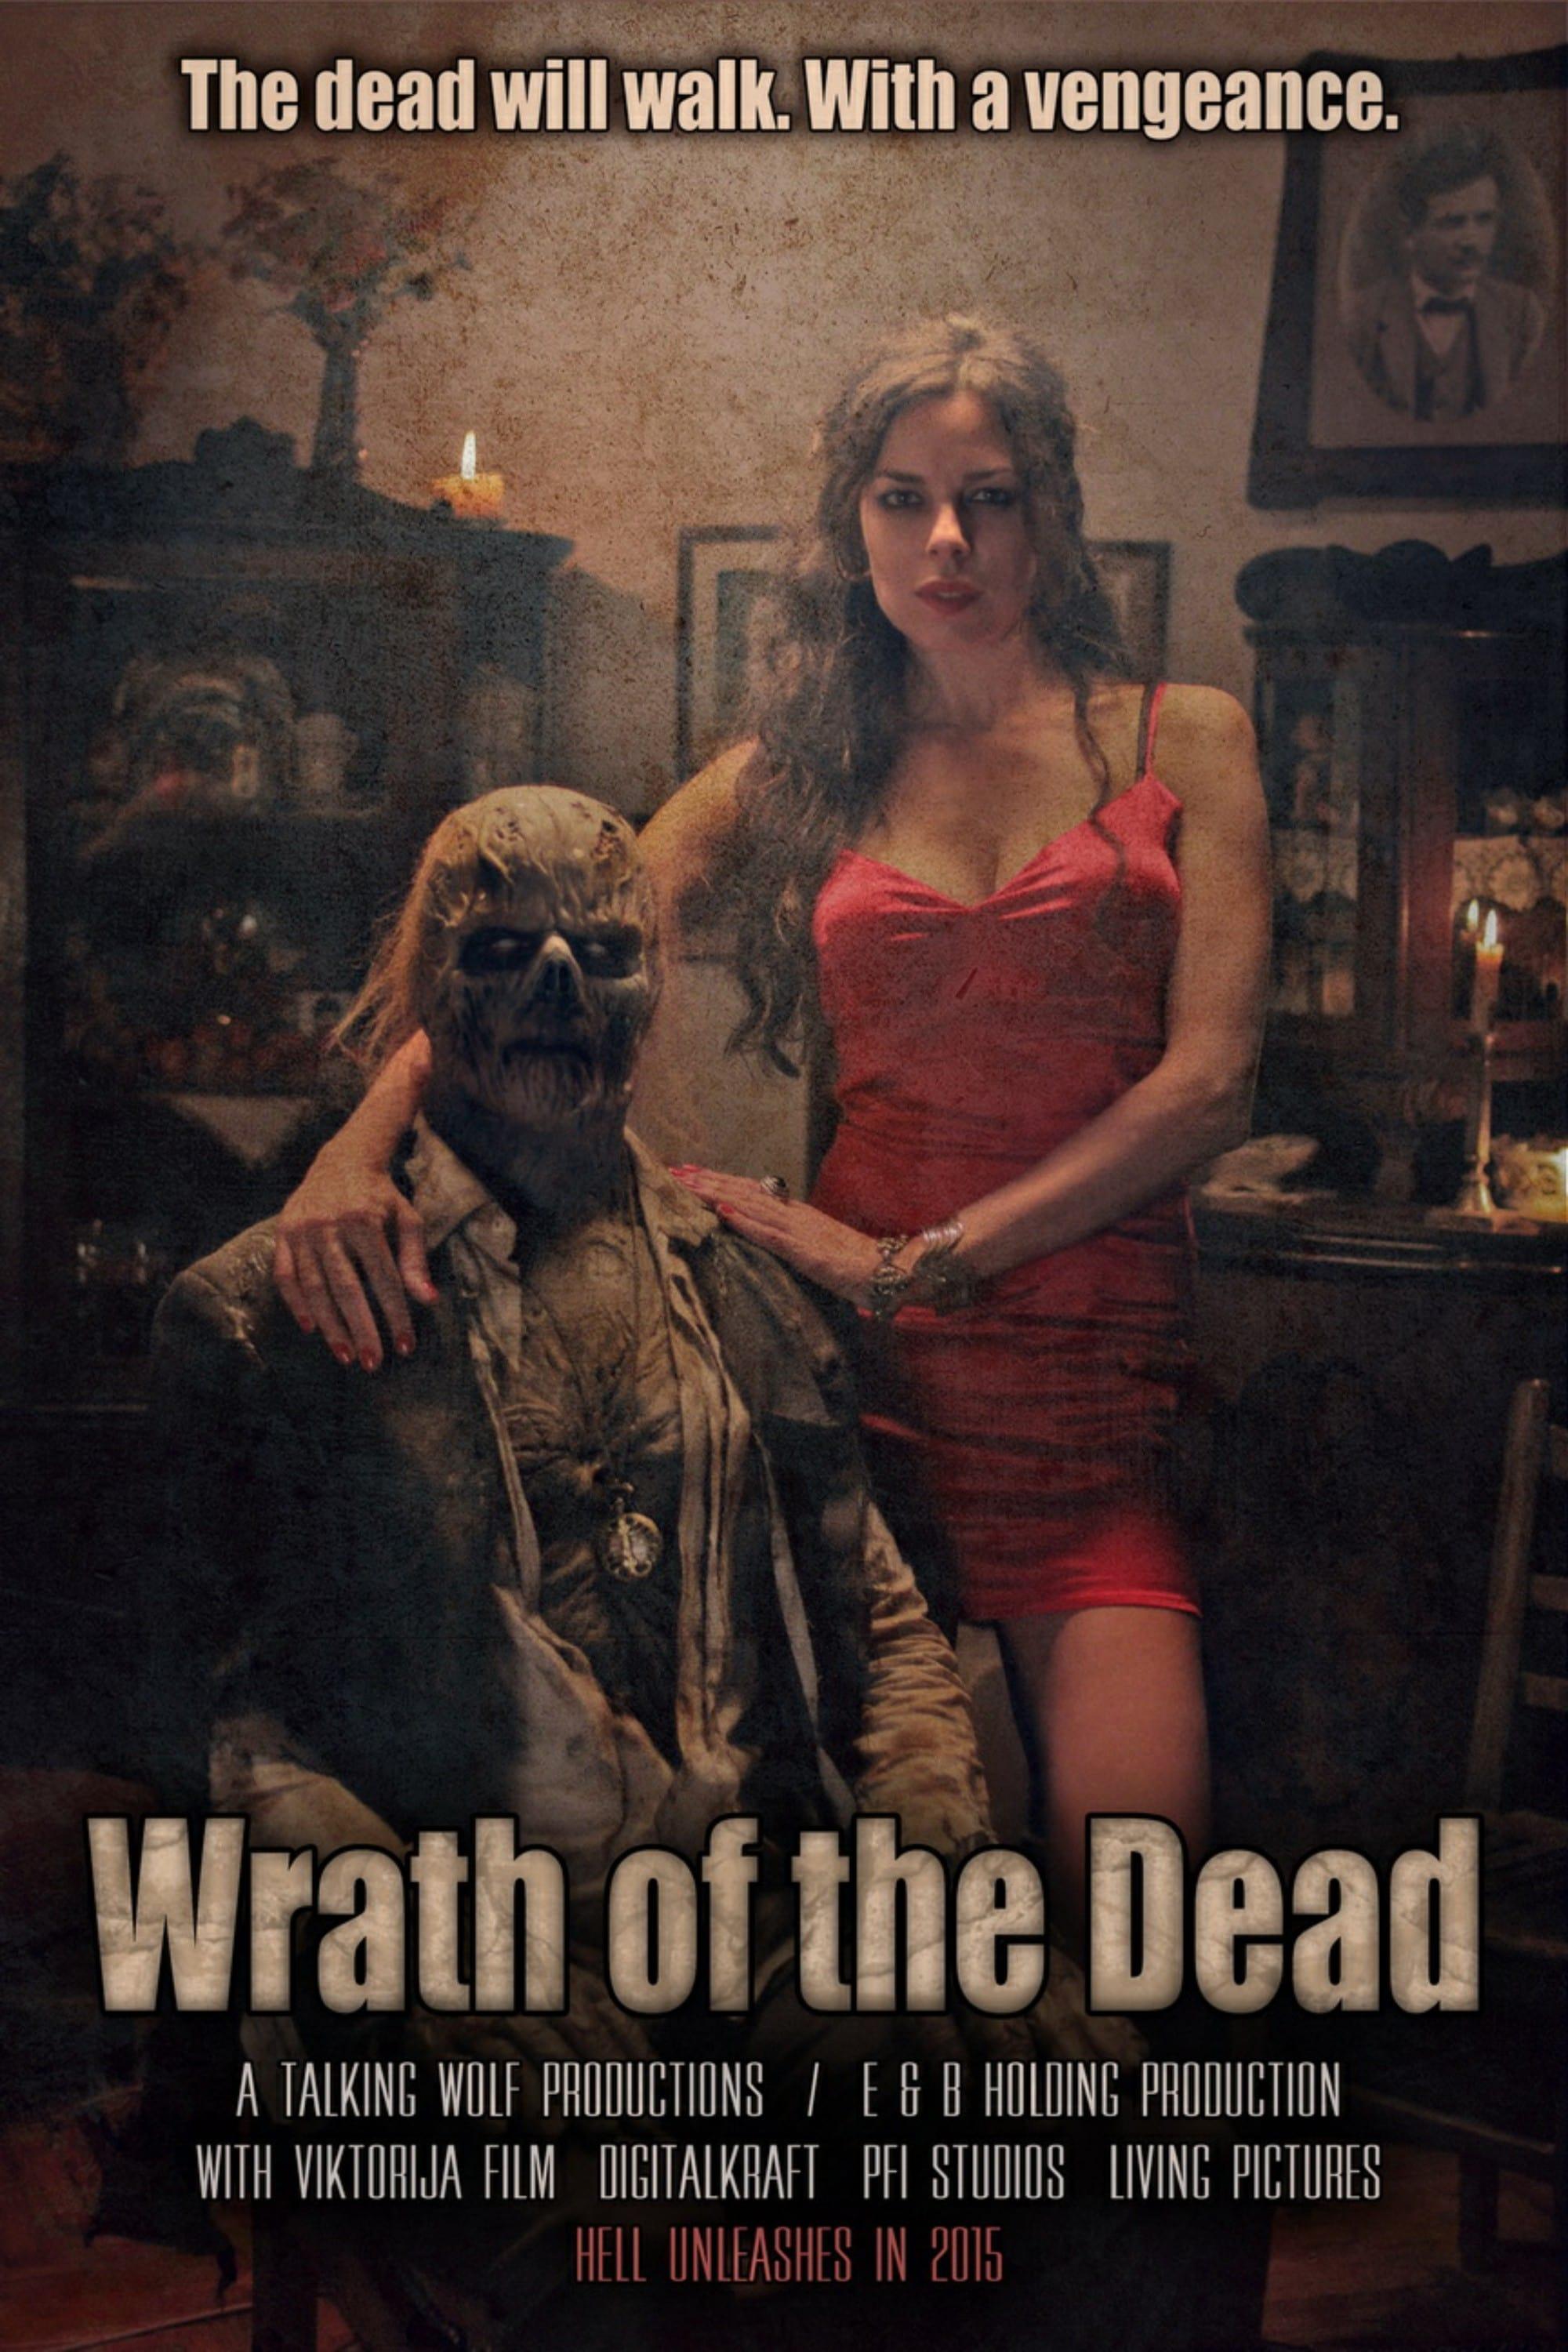 Wrath of the Dead poster